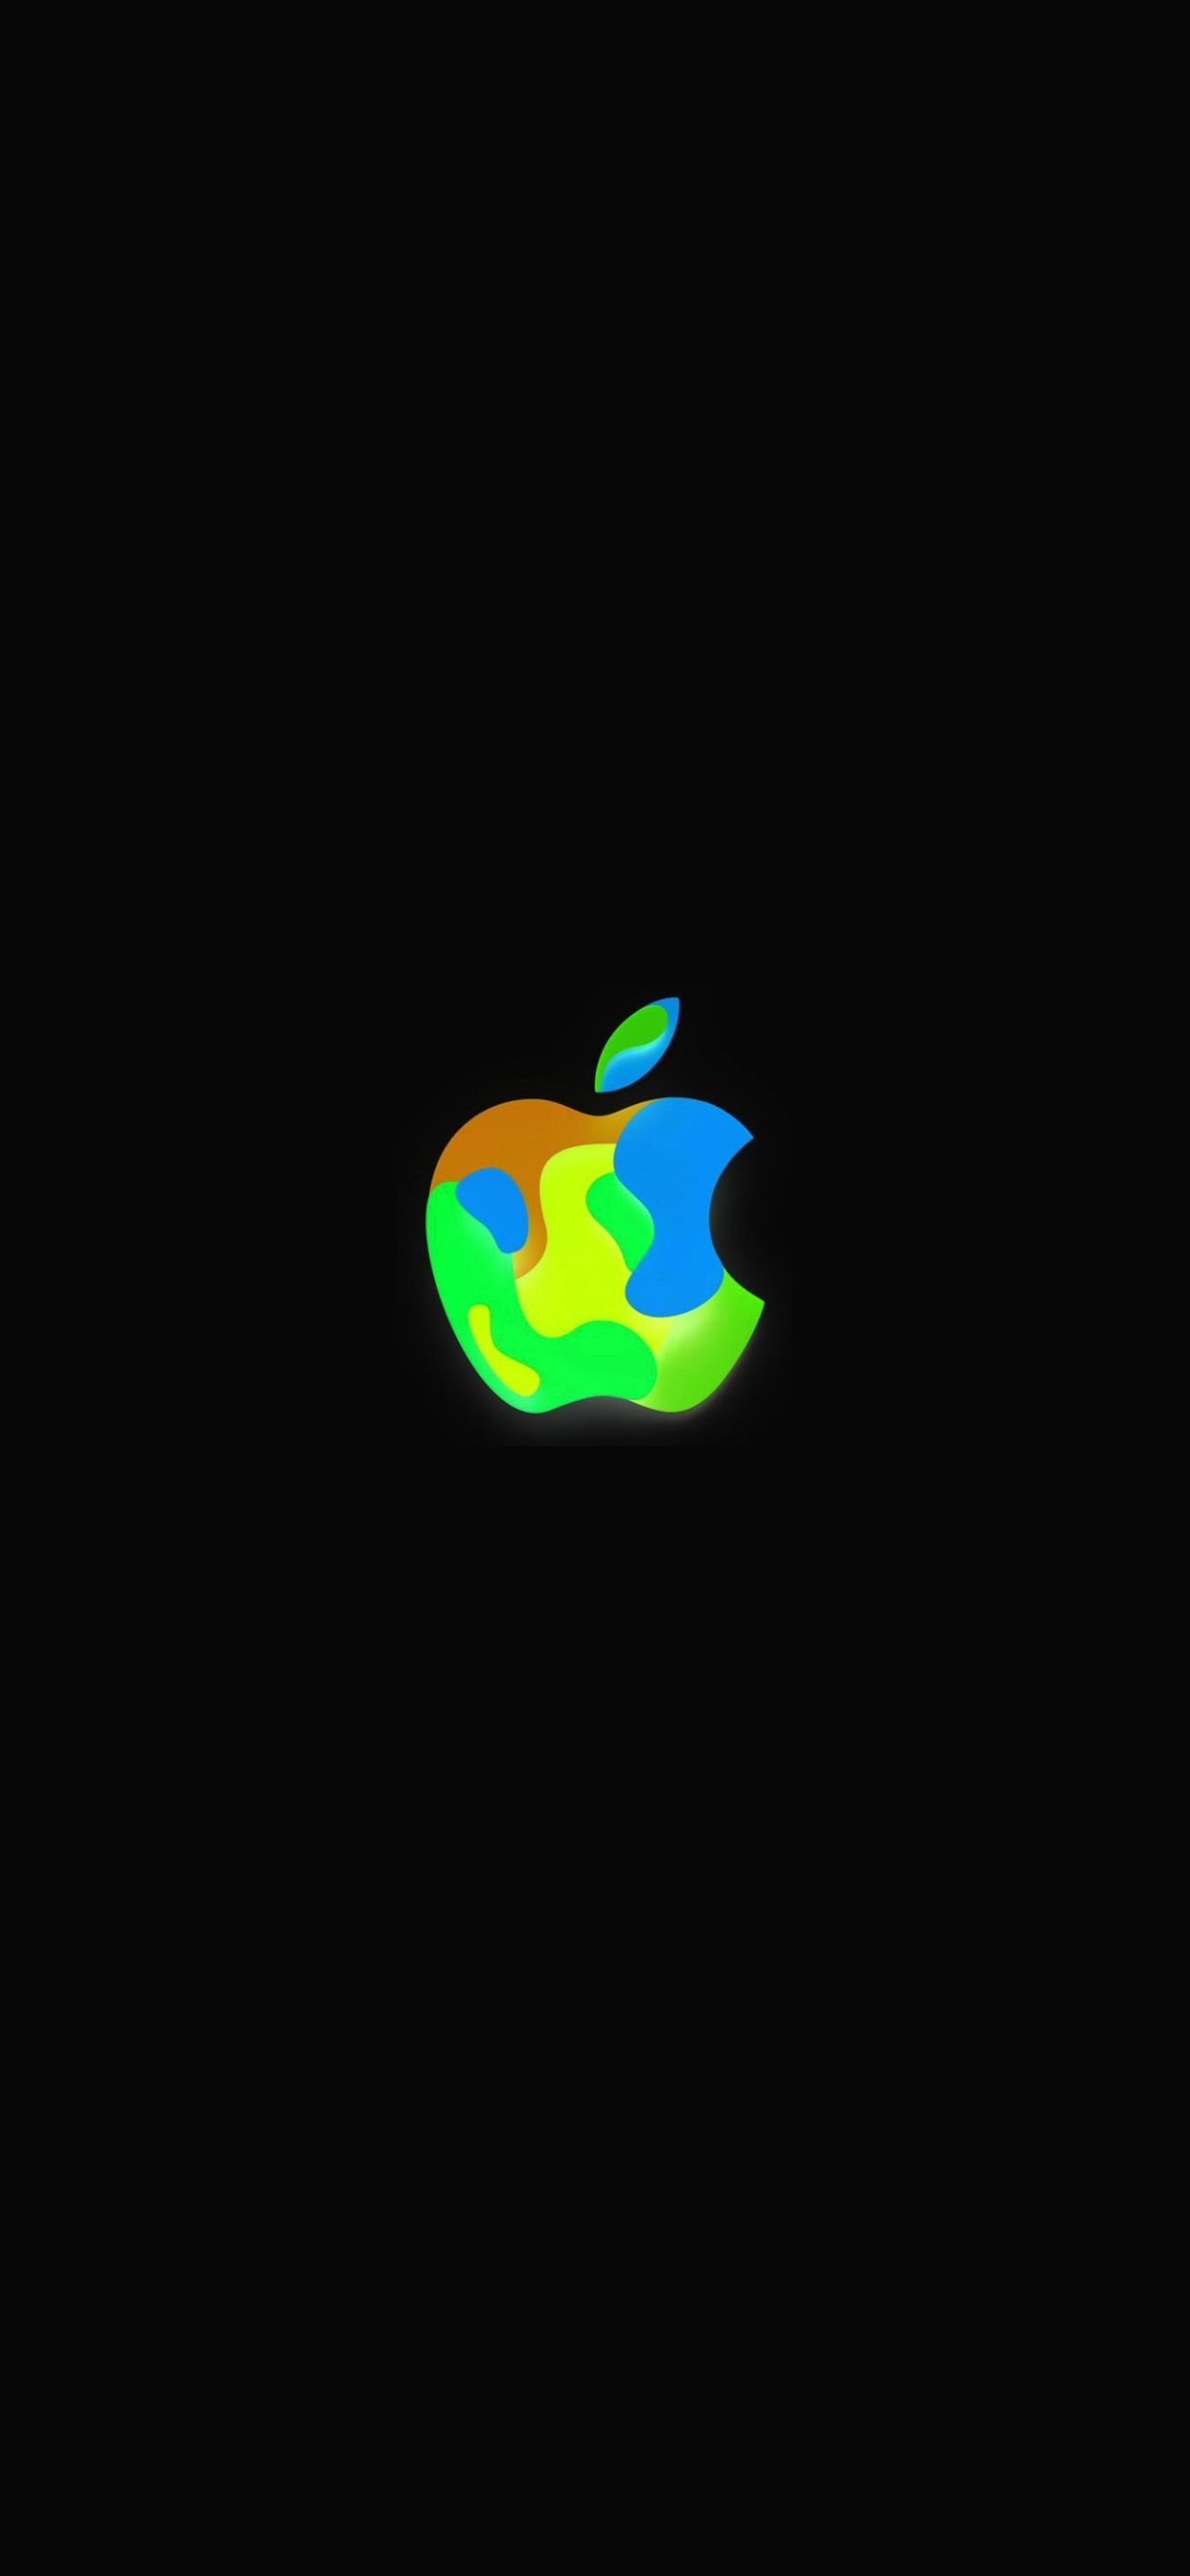 Gather Round Apple Event Wallpapers  3uTools